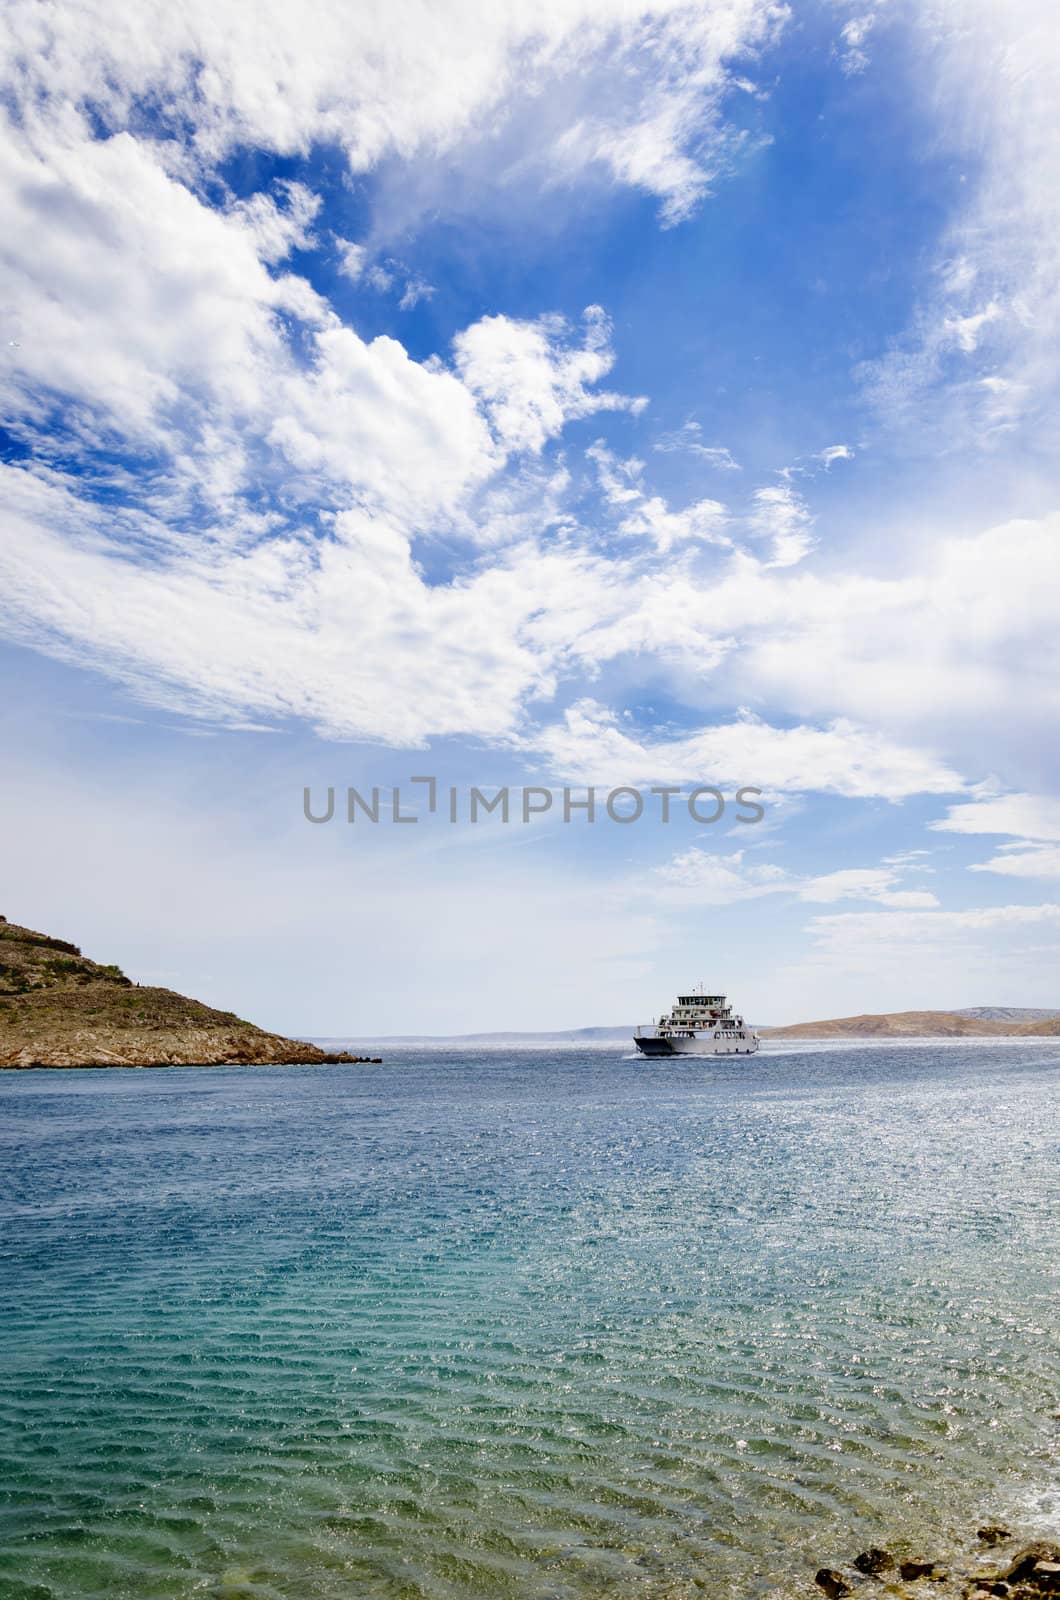 Small ferry aproaching on sunny and windy day in Stinica, Croatia.